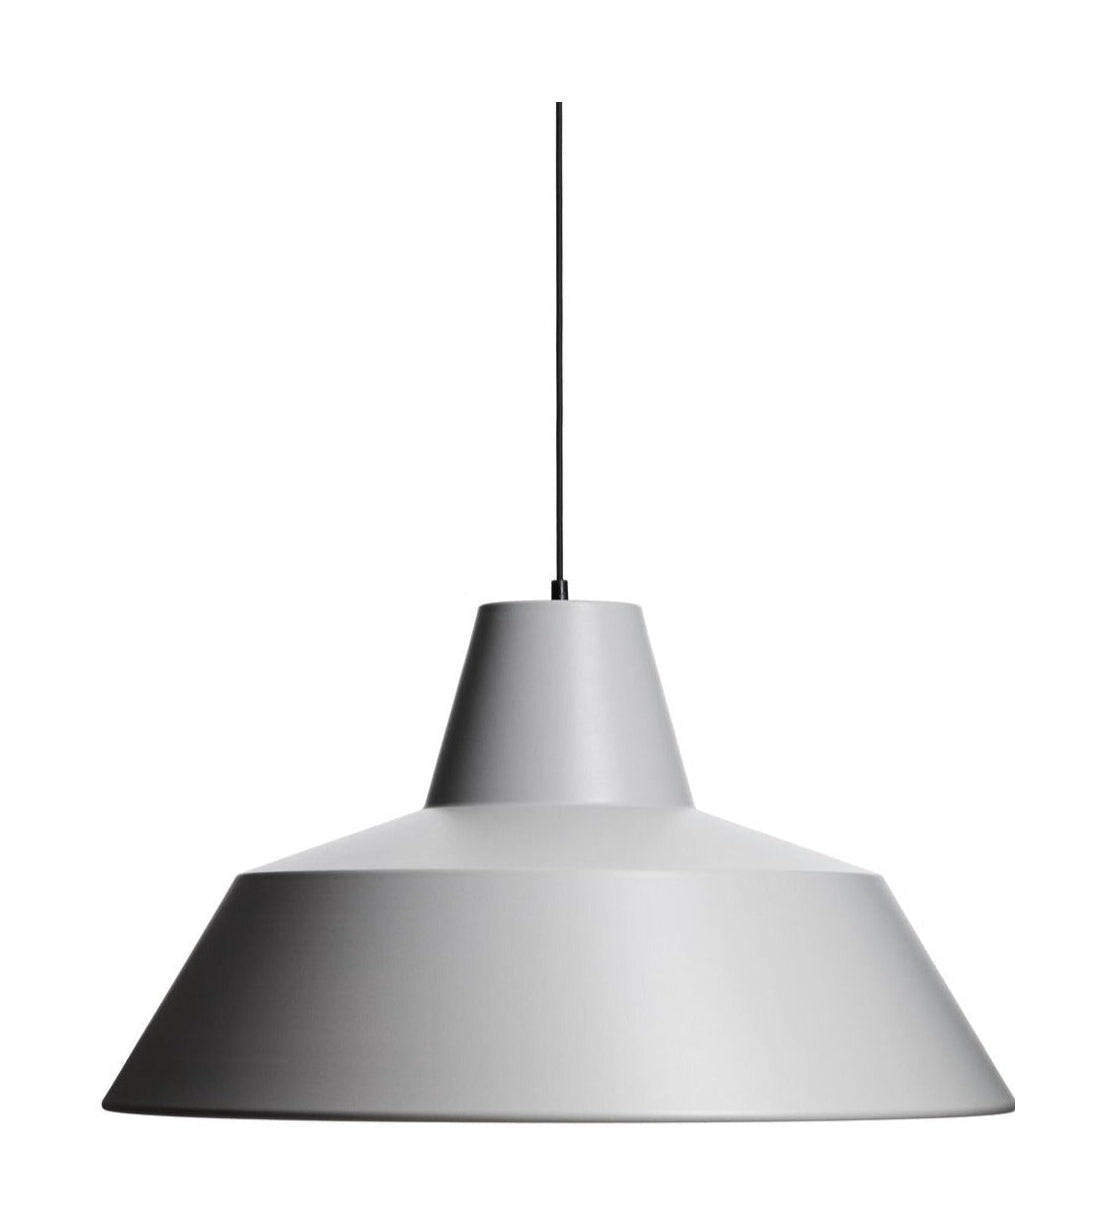 Made By Hand Workshop Suspension Lamp W5, Grey